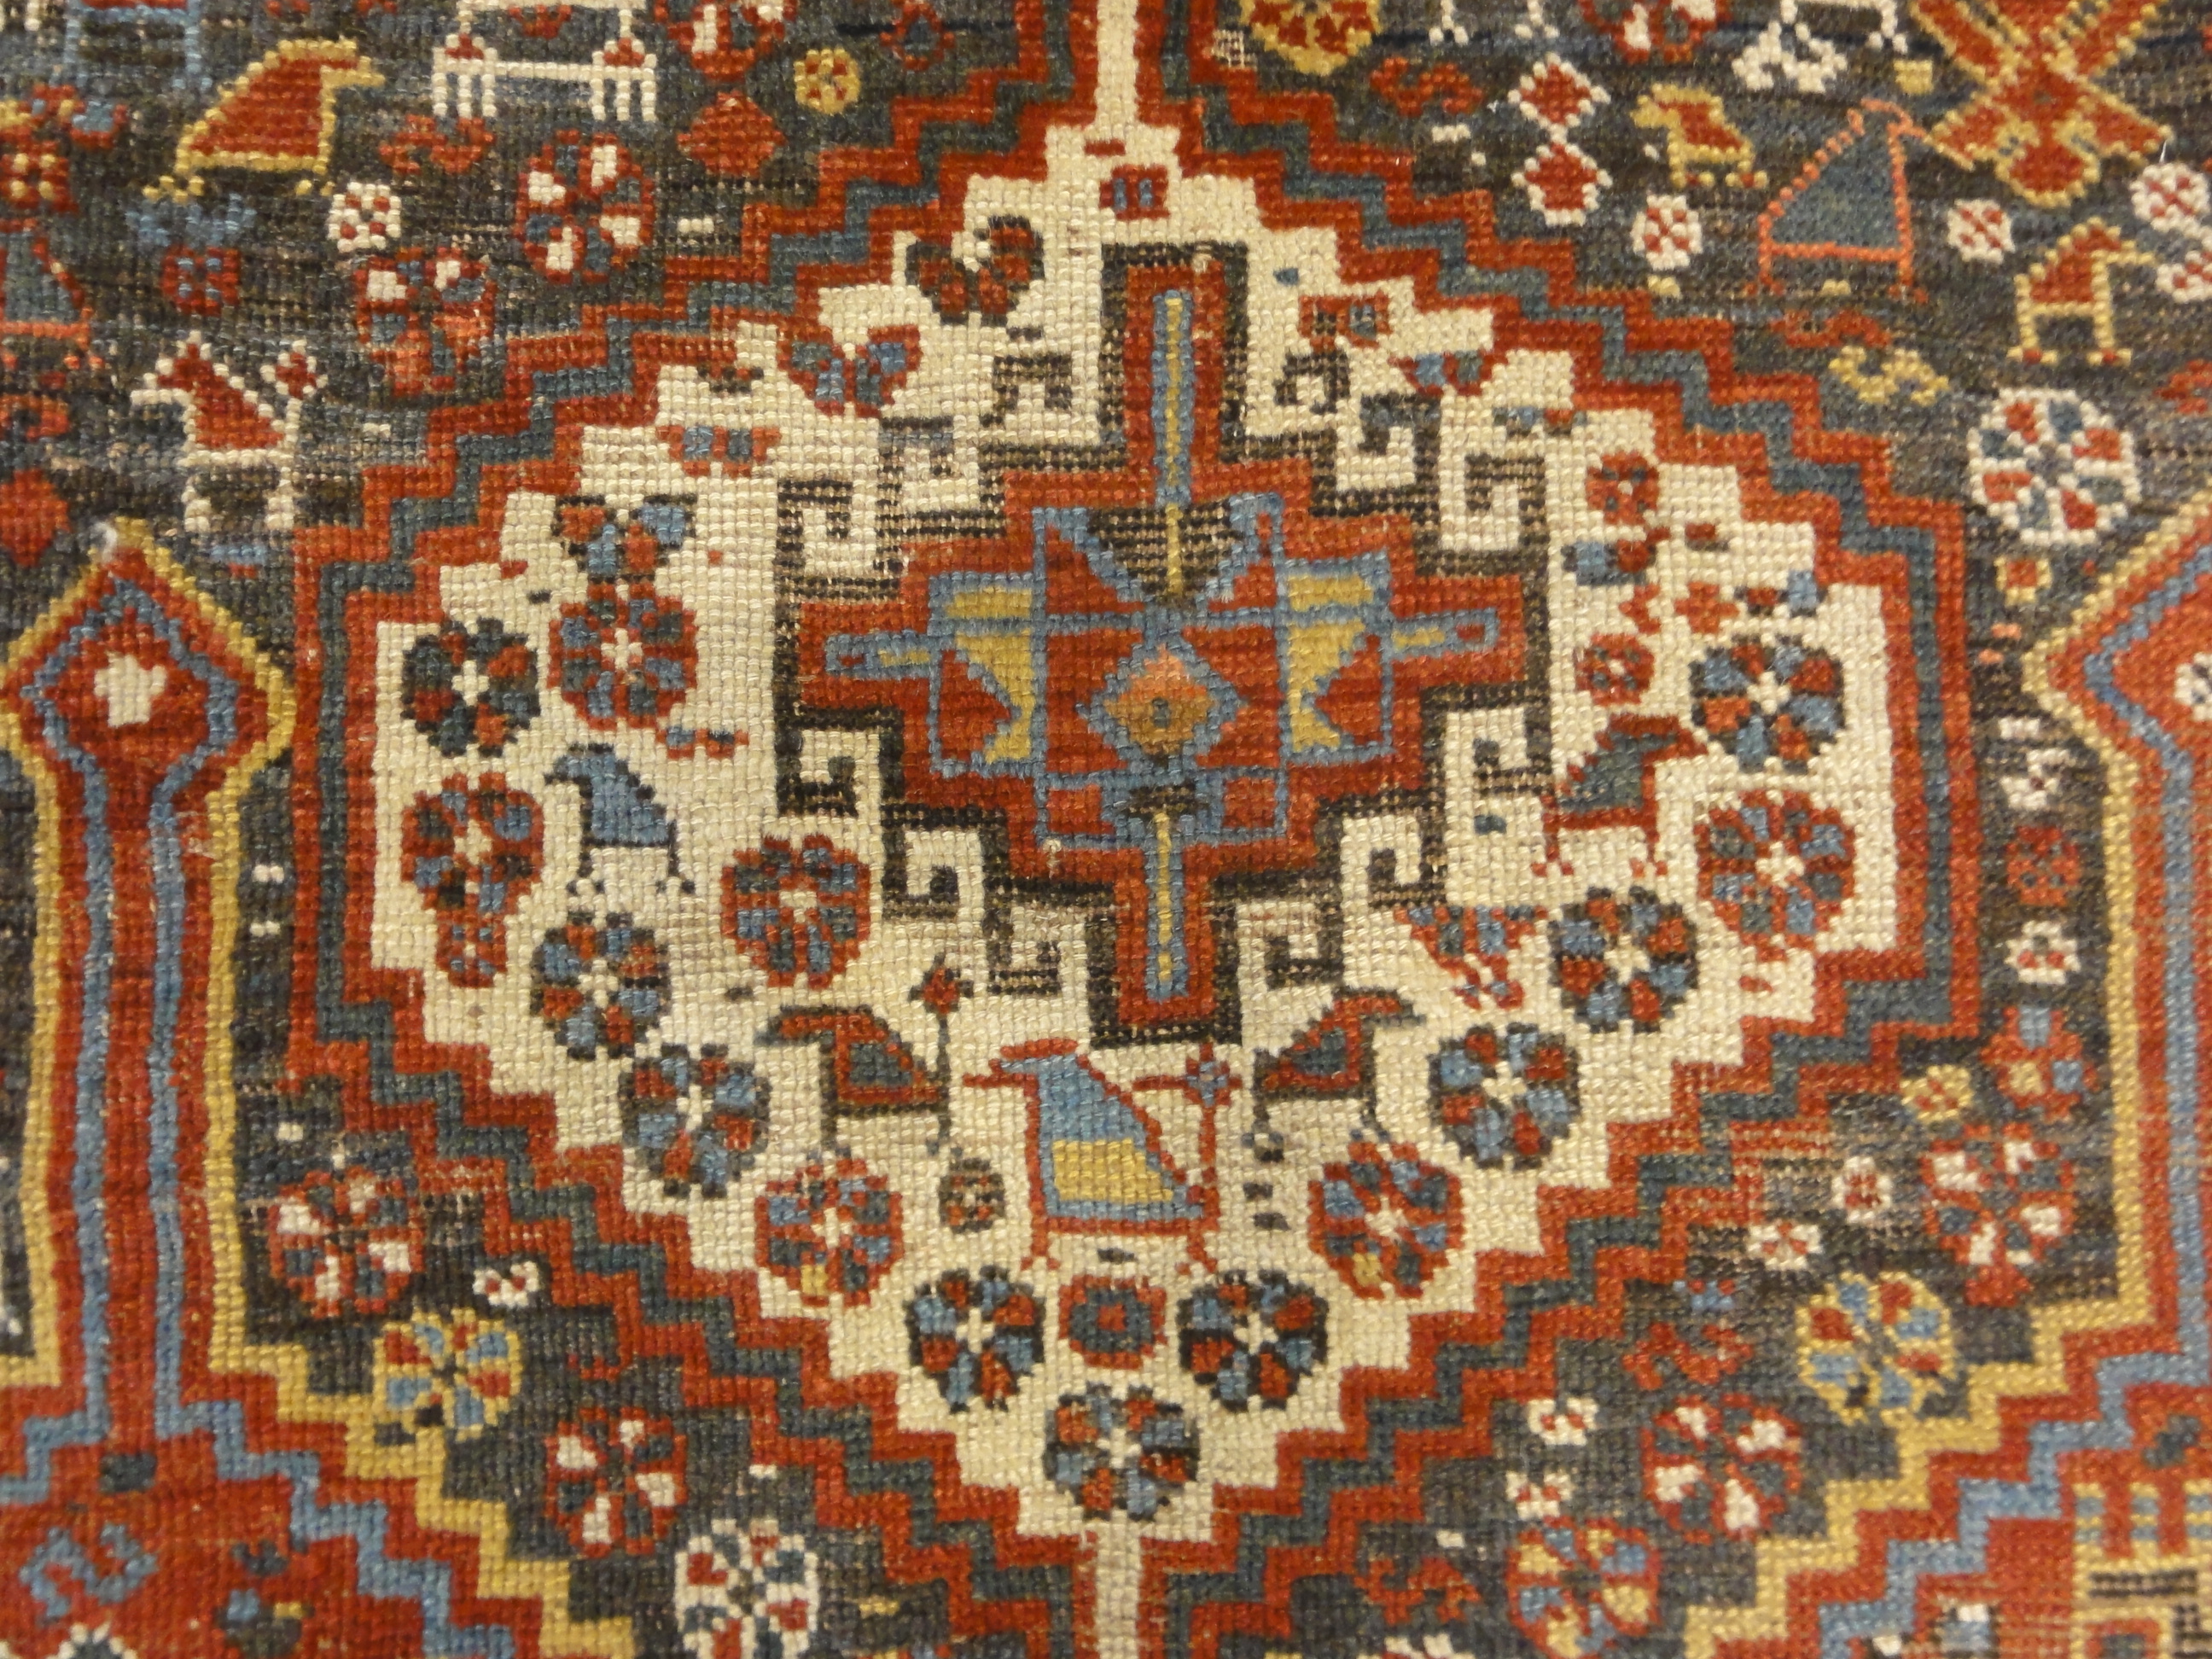 Antique Persian Khamseh Chicken Rug. A piece of genuine woven carpet art sold by Santa Barbara Design Center Rugs and More.